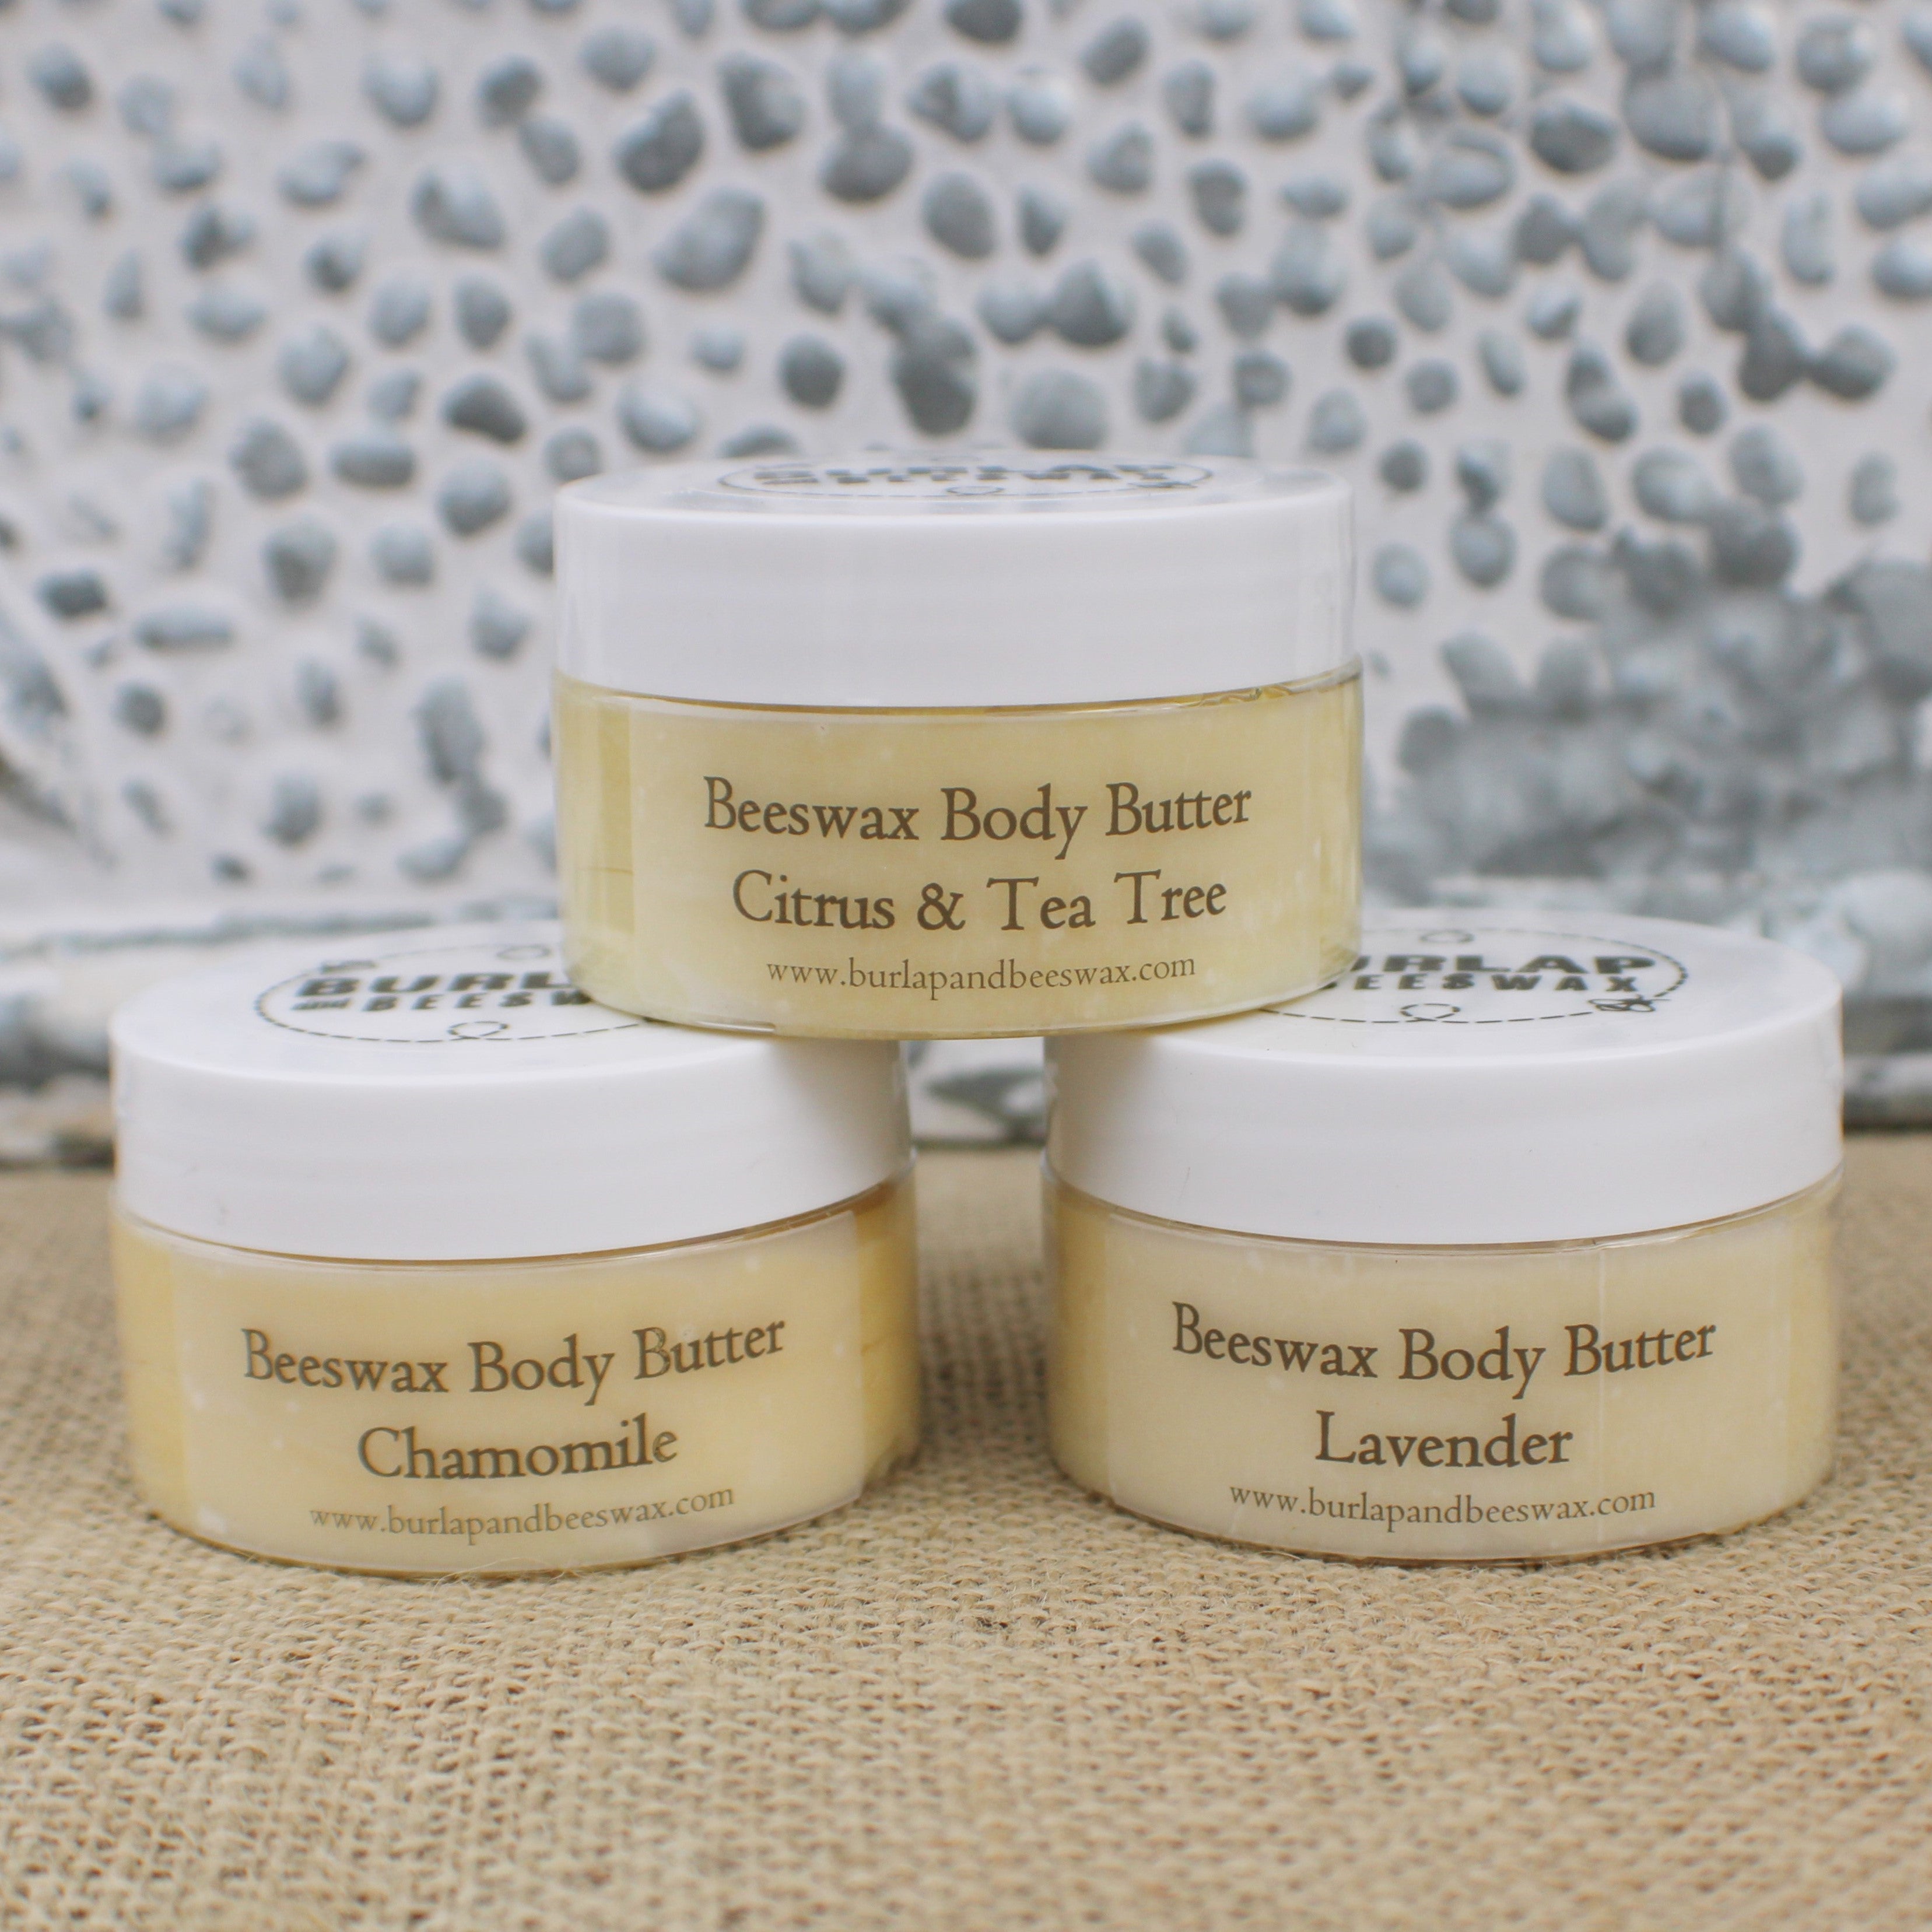 Beeswax Infused Body Butter